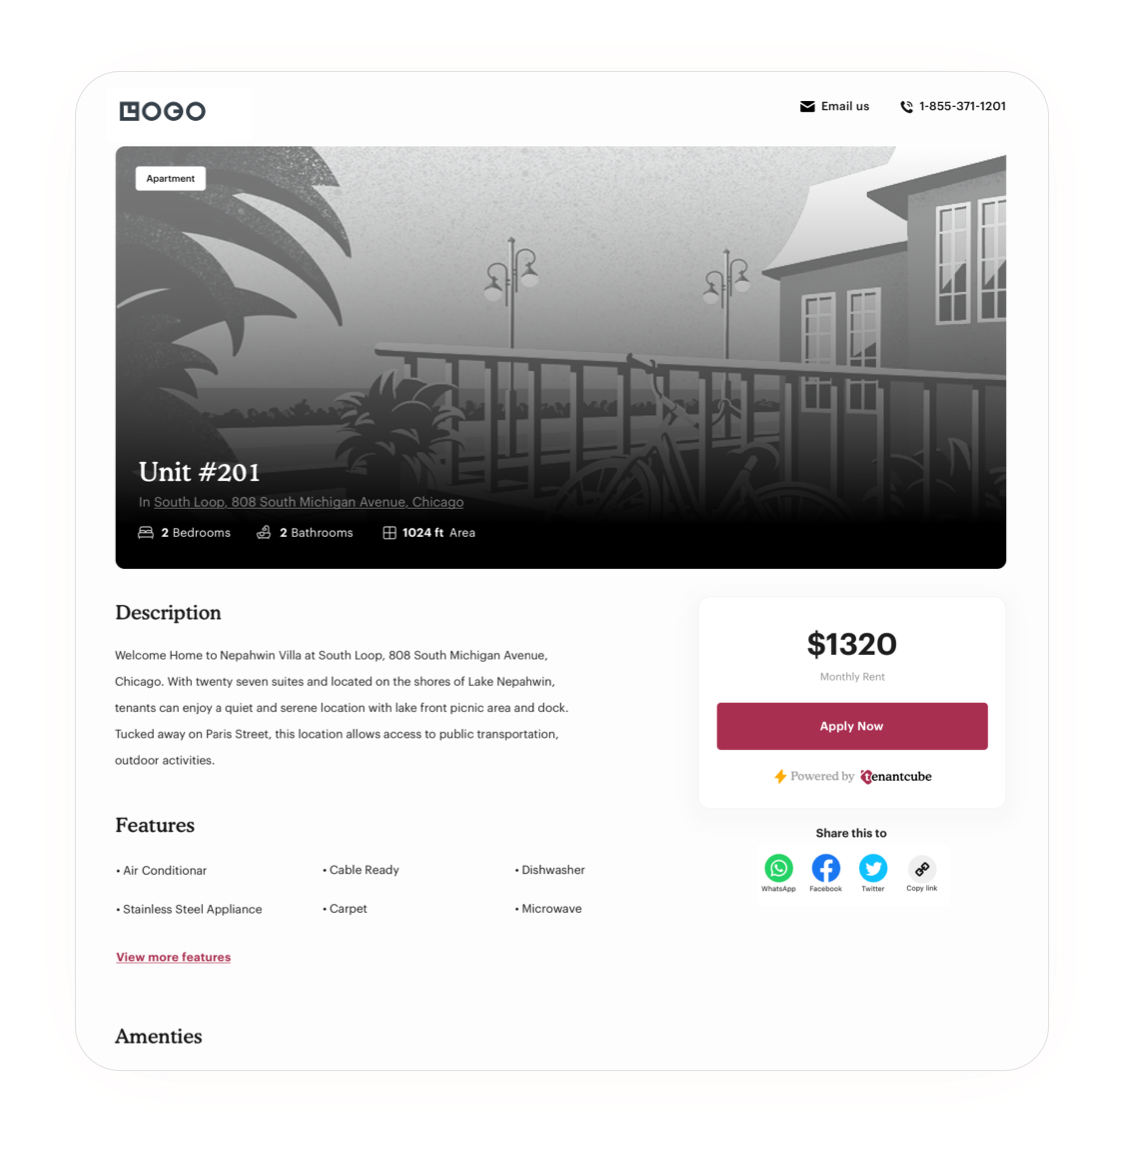 Create beautiful microsites for promoting your rentals.